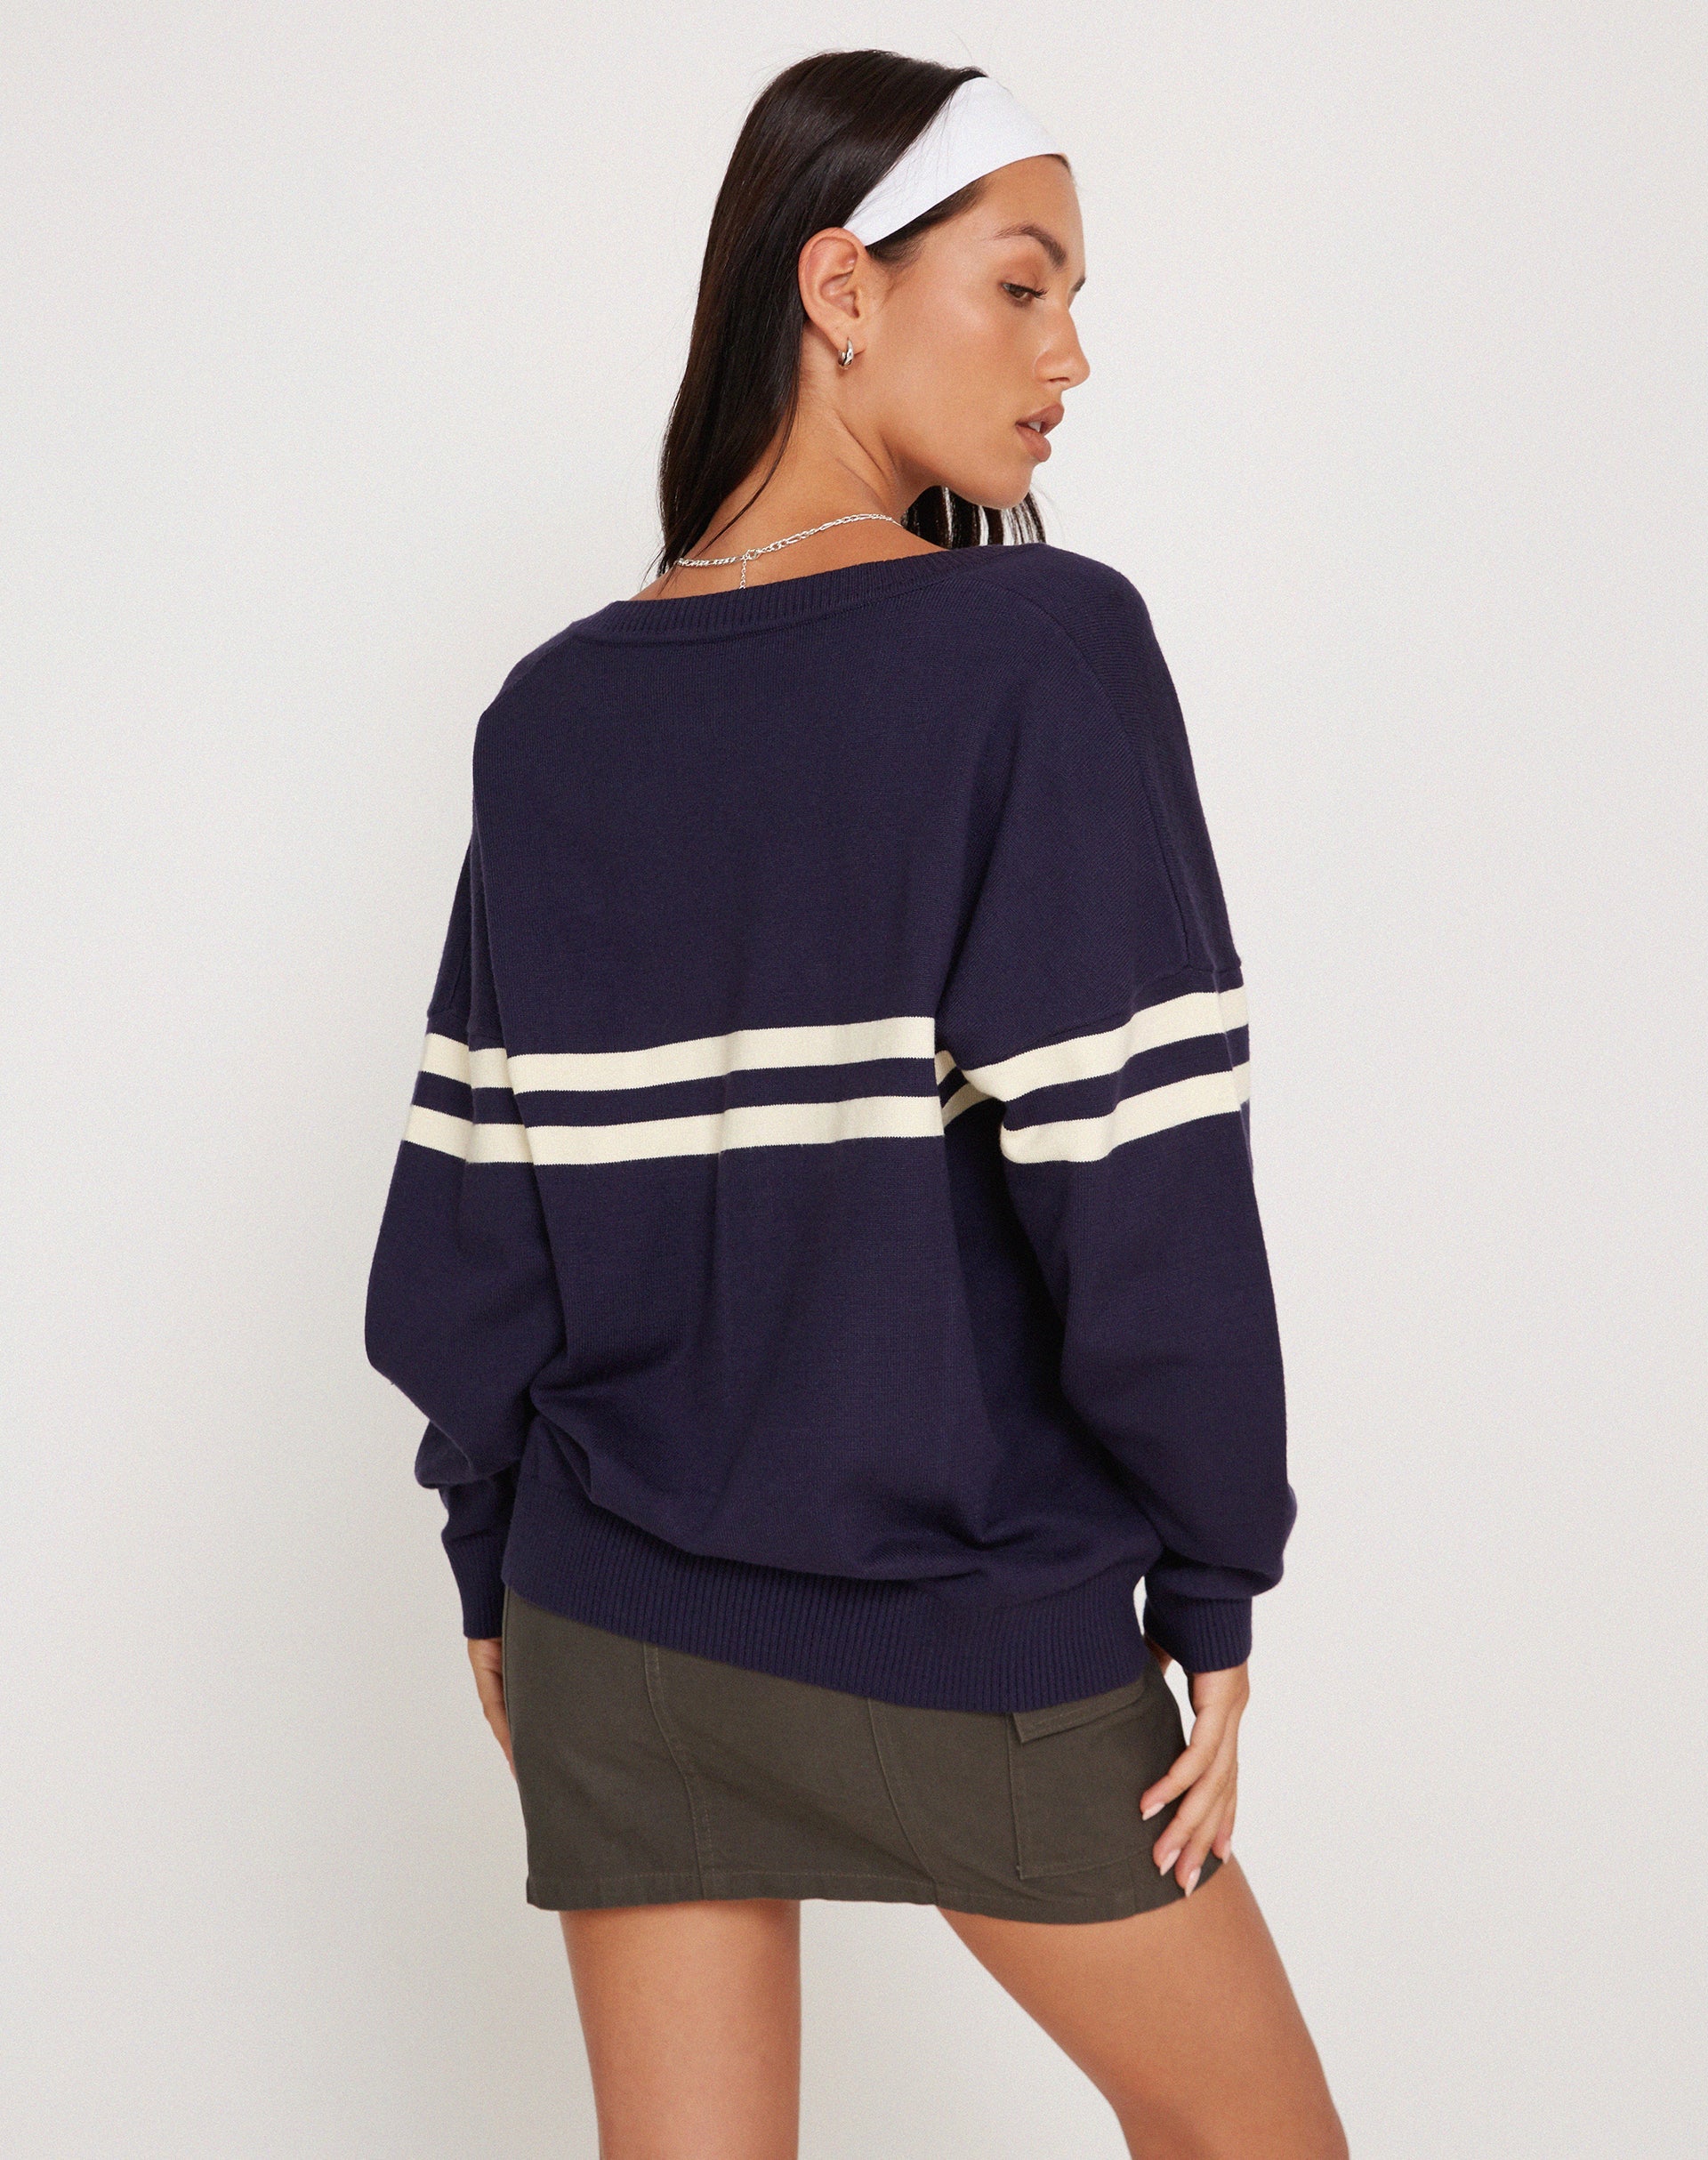 Image of Louna Jumper in Peacoat Blue with White Stripe